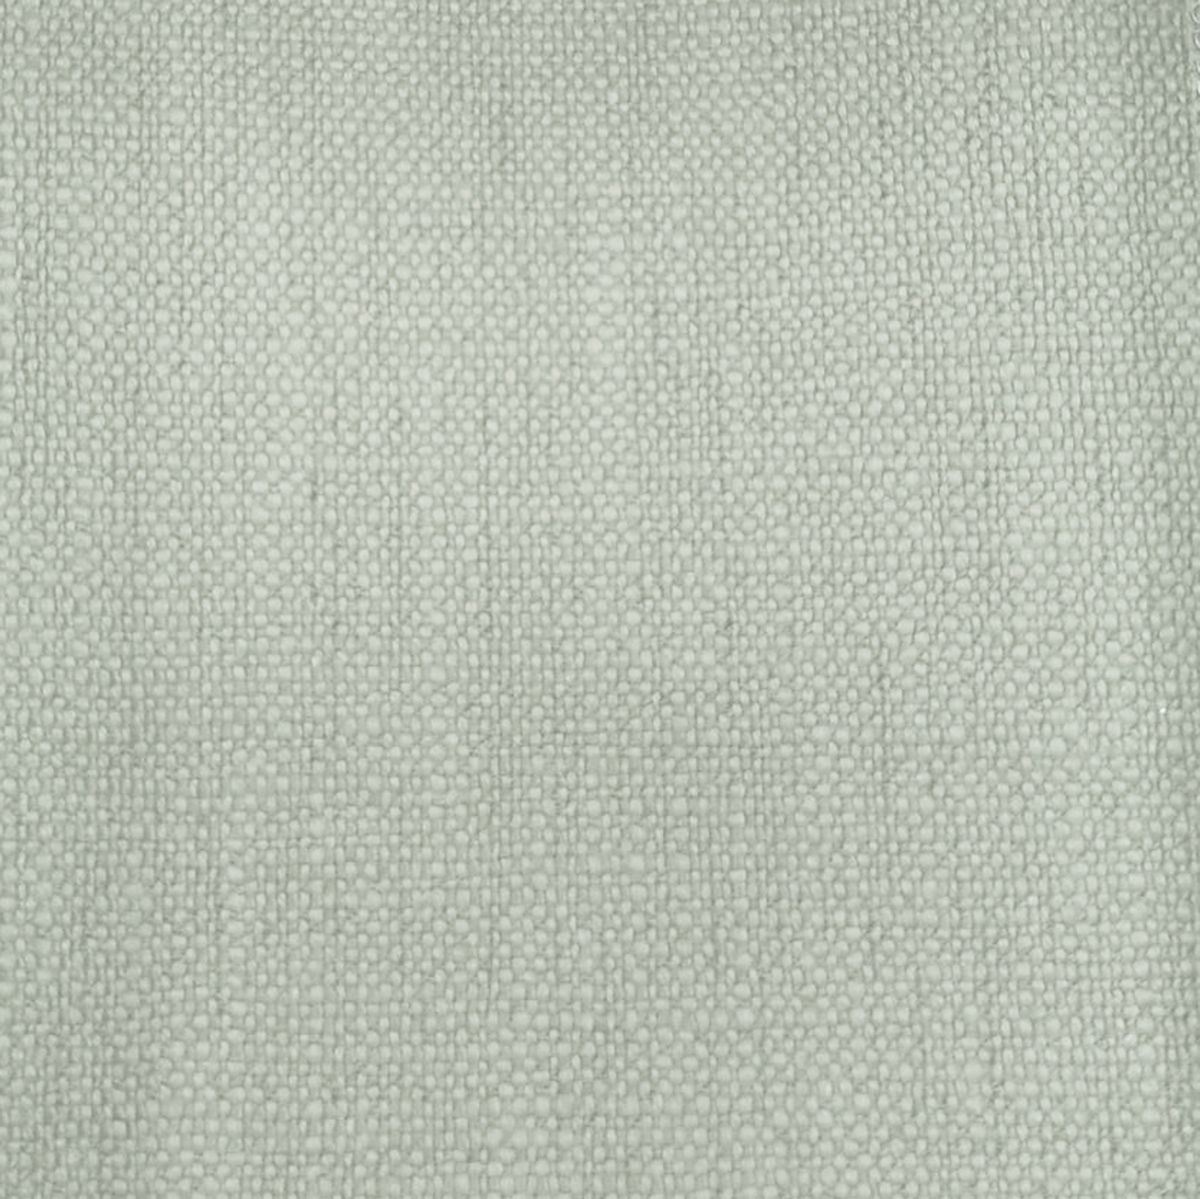 Trento Silver Fabric by Voyage Maison